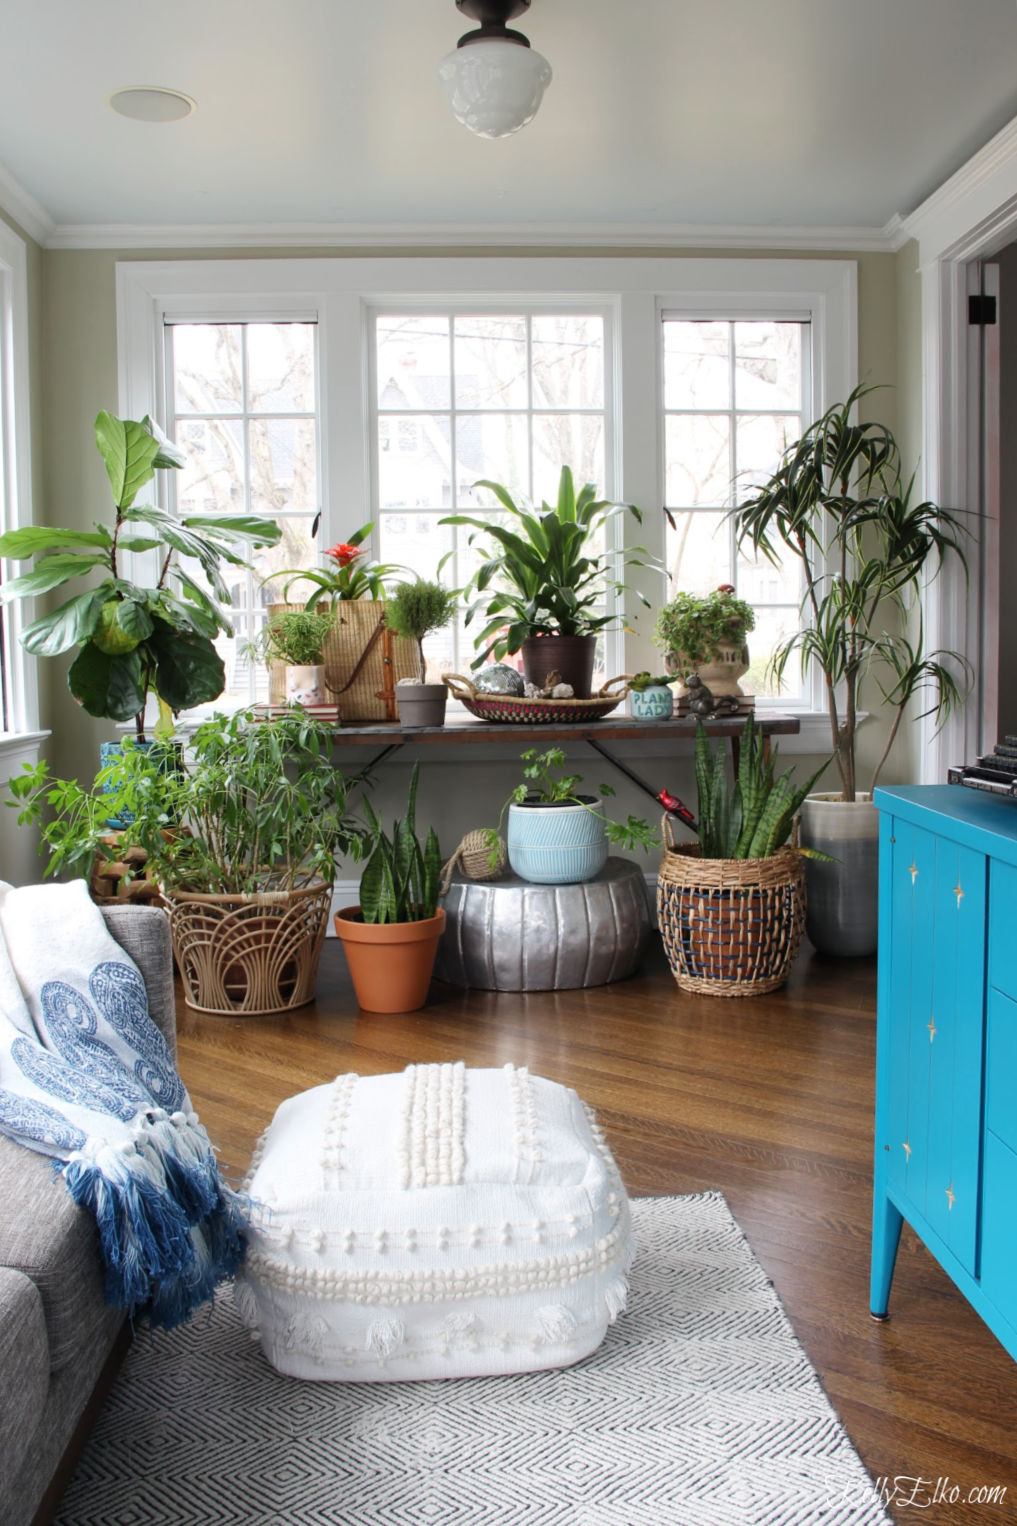 Plant Lady Sunroom - love this light filled room with houseplants, baskets, planters and vintage finds kellyelko.com #plants #houseplants #sunroom #jungalow #jungalowstyle #bohostyle #bohodecor #interiordesign #planters #vintagedecor #plantlady #eclecticdecor #kellyelko